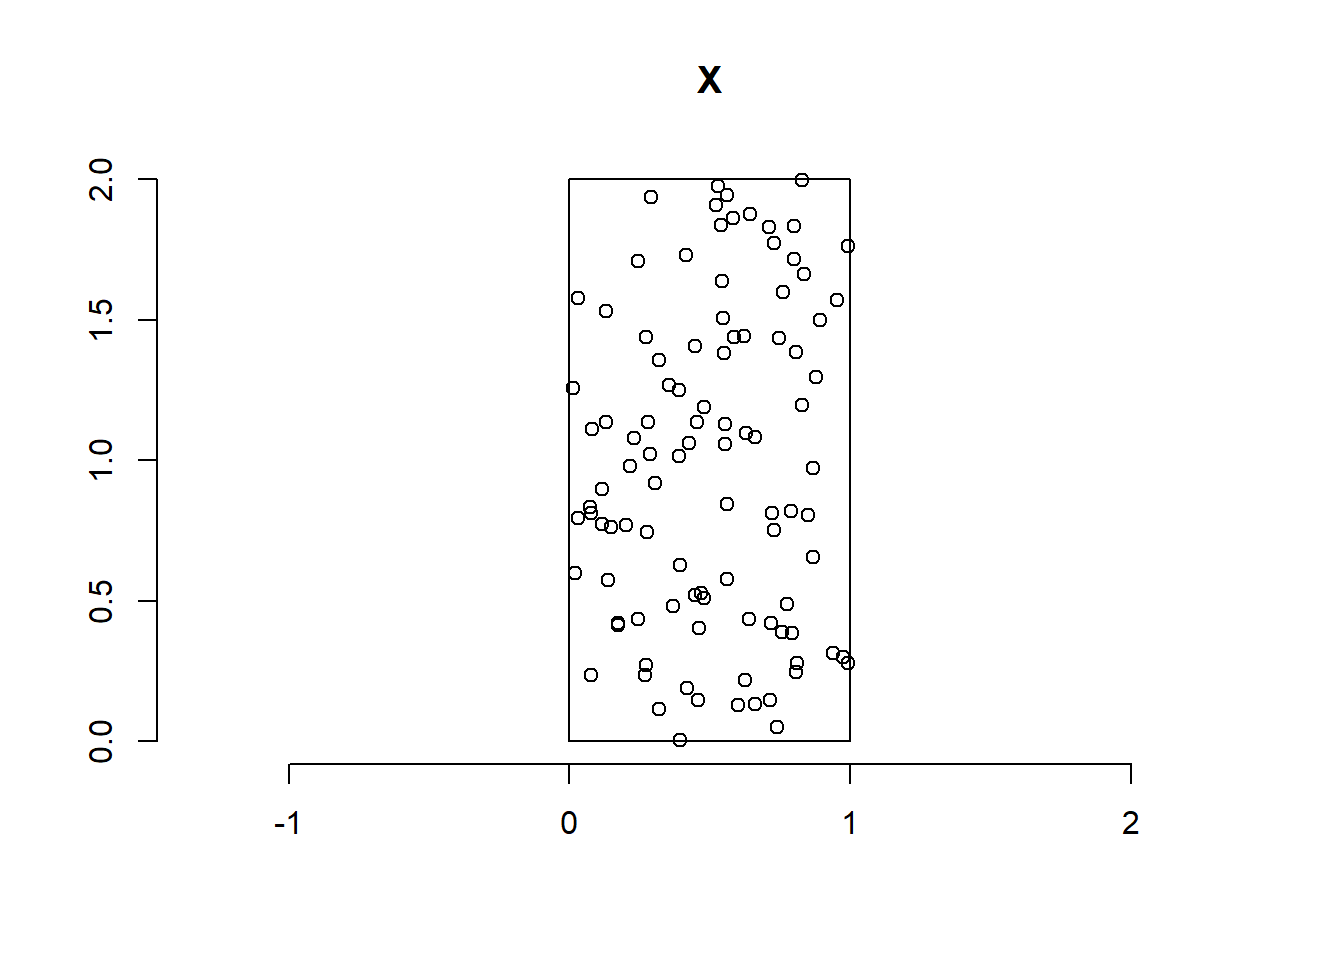 Point pattern of 100 independent uniform random points generated in $[0, 1] \times [0, 2]$.